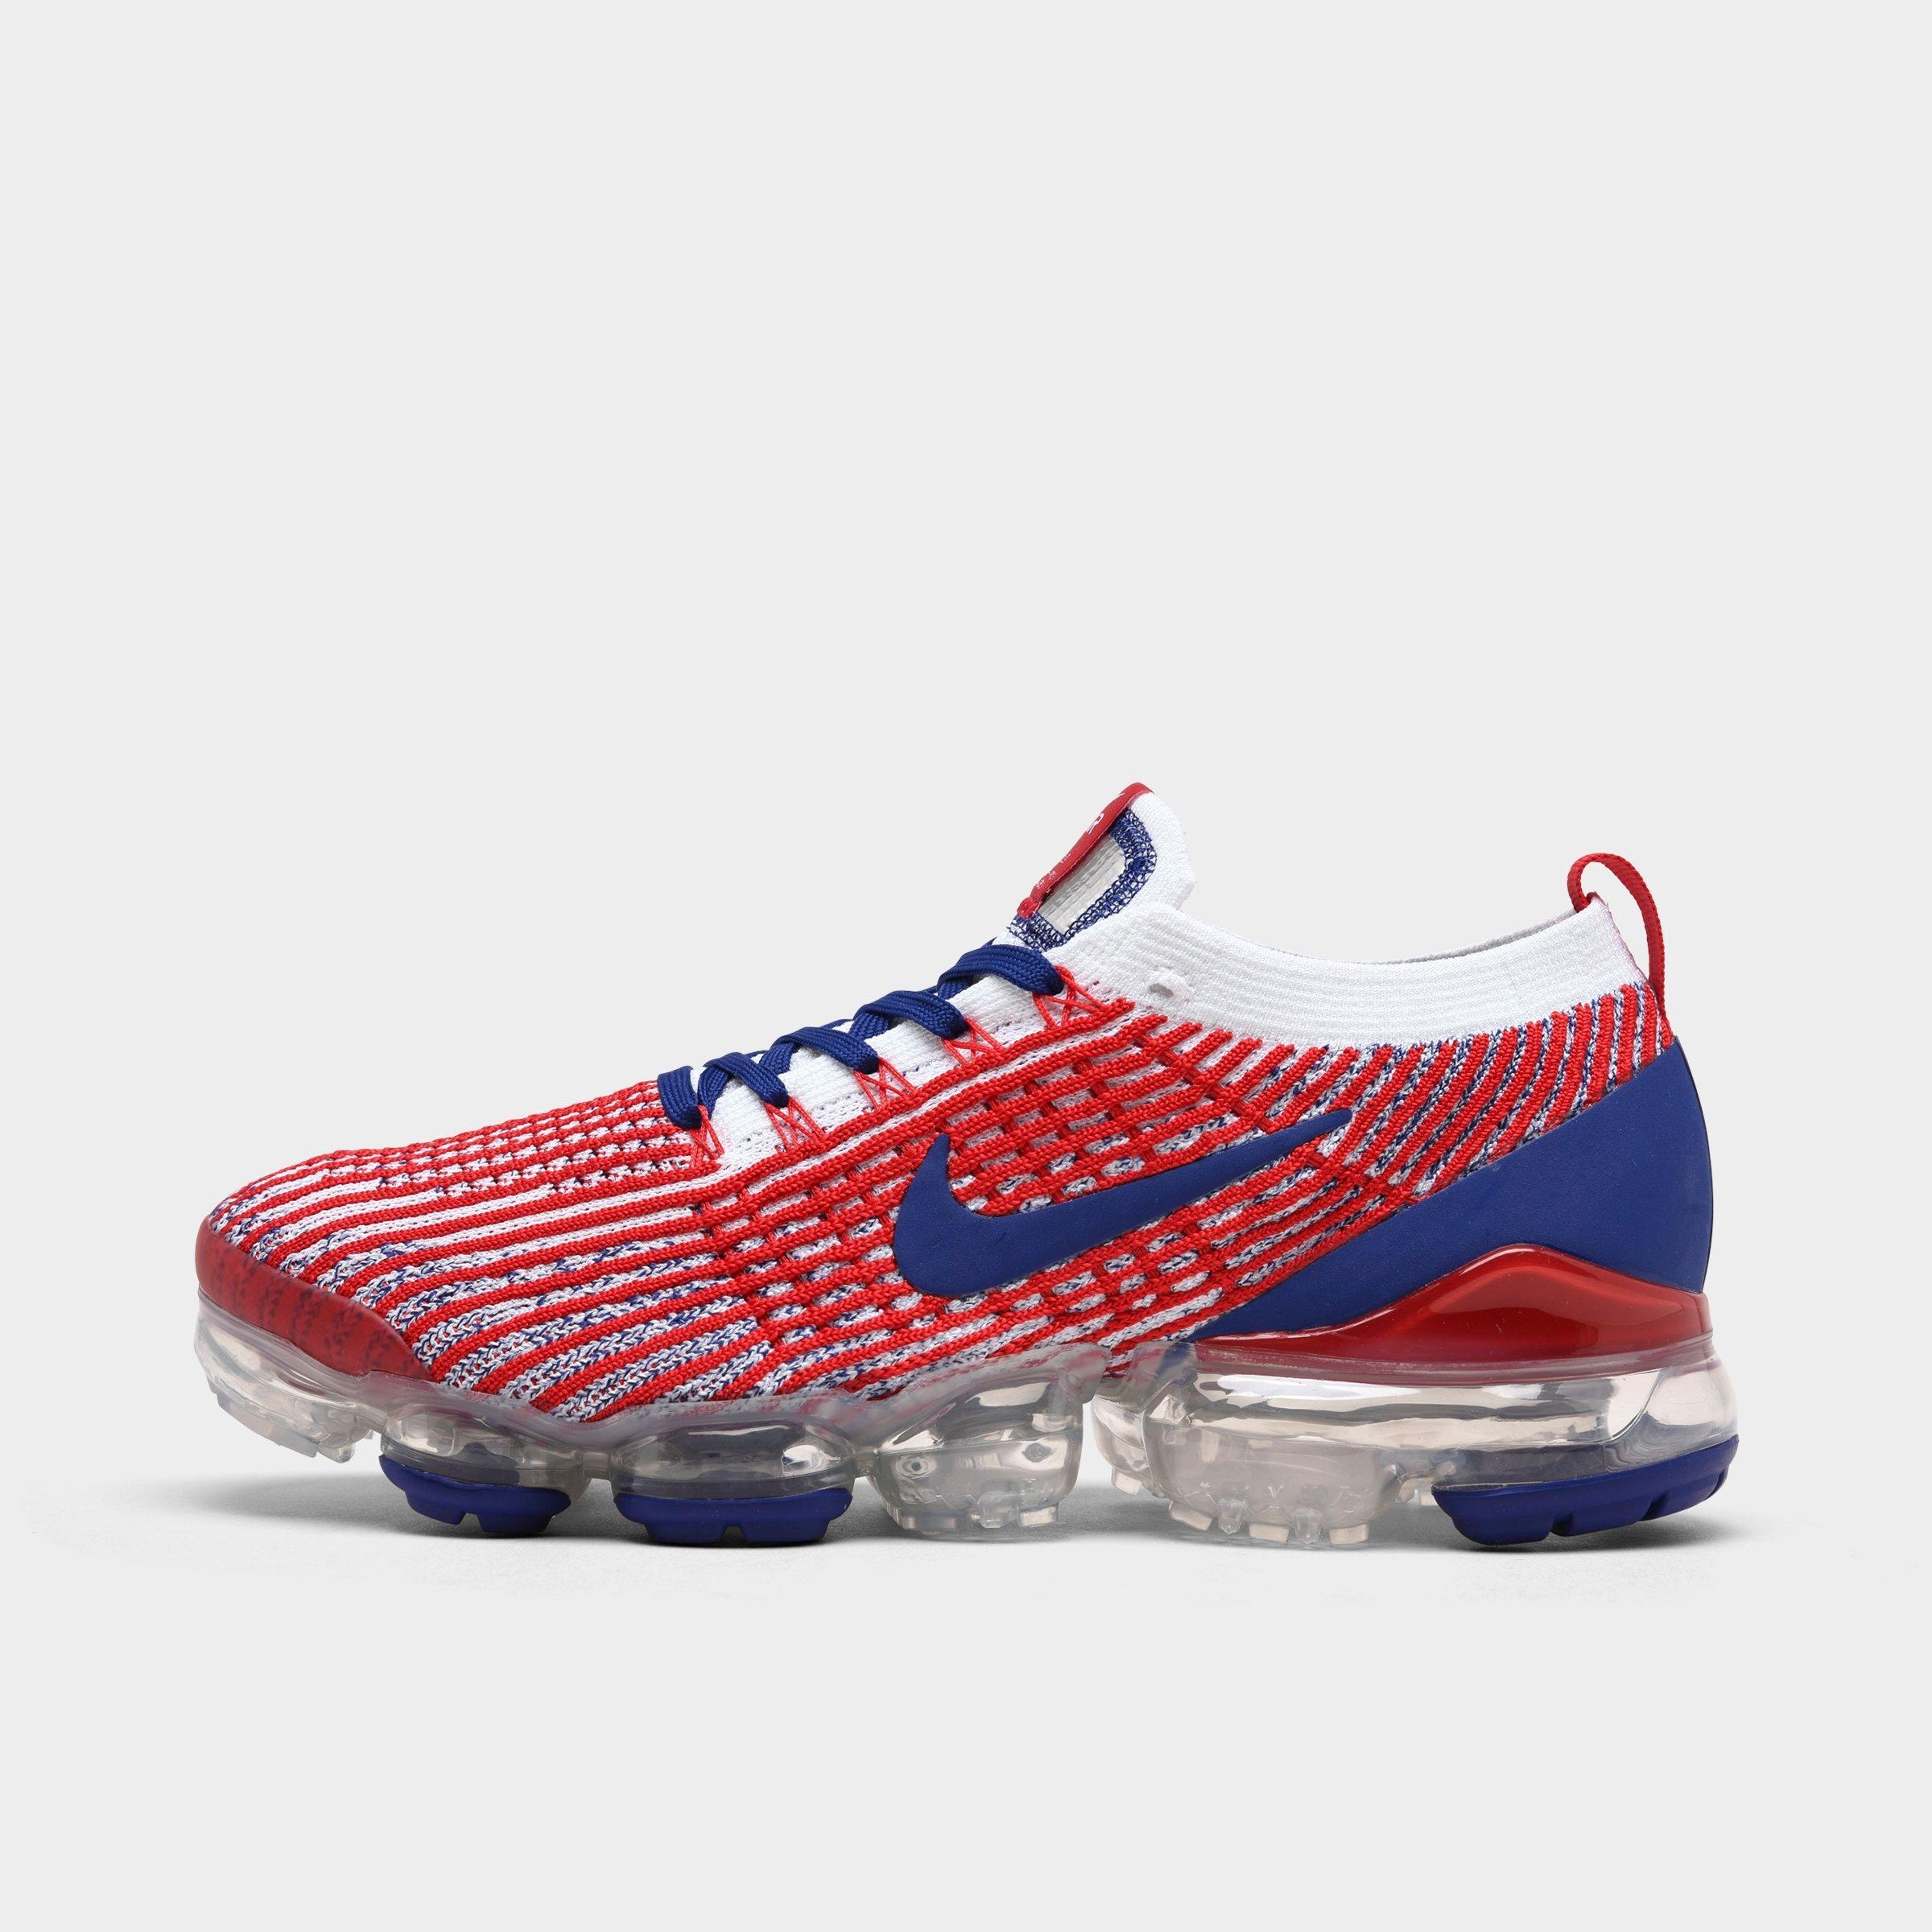 red white blue vapormax